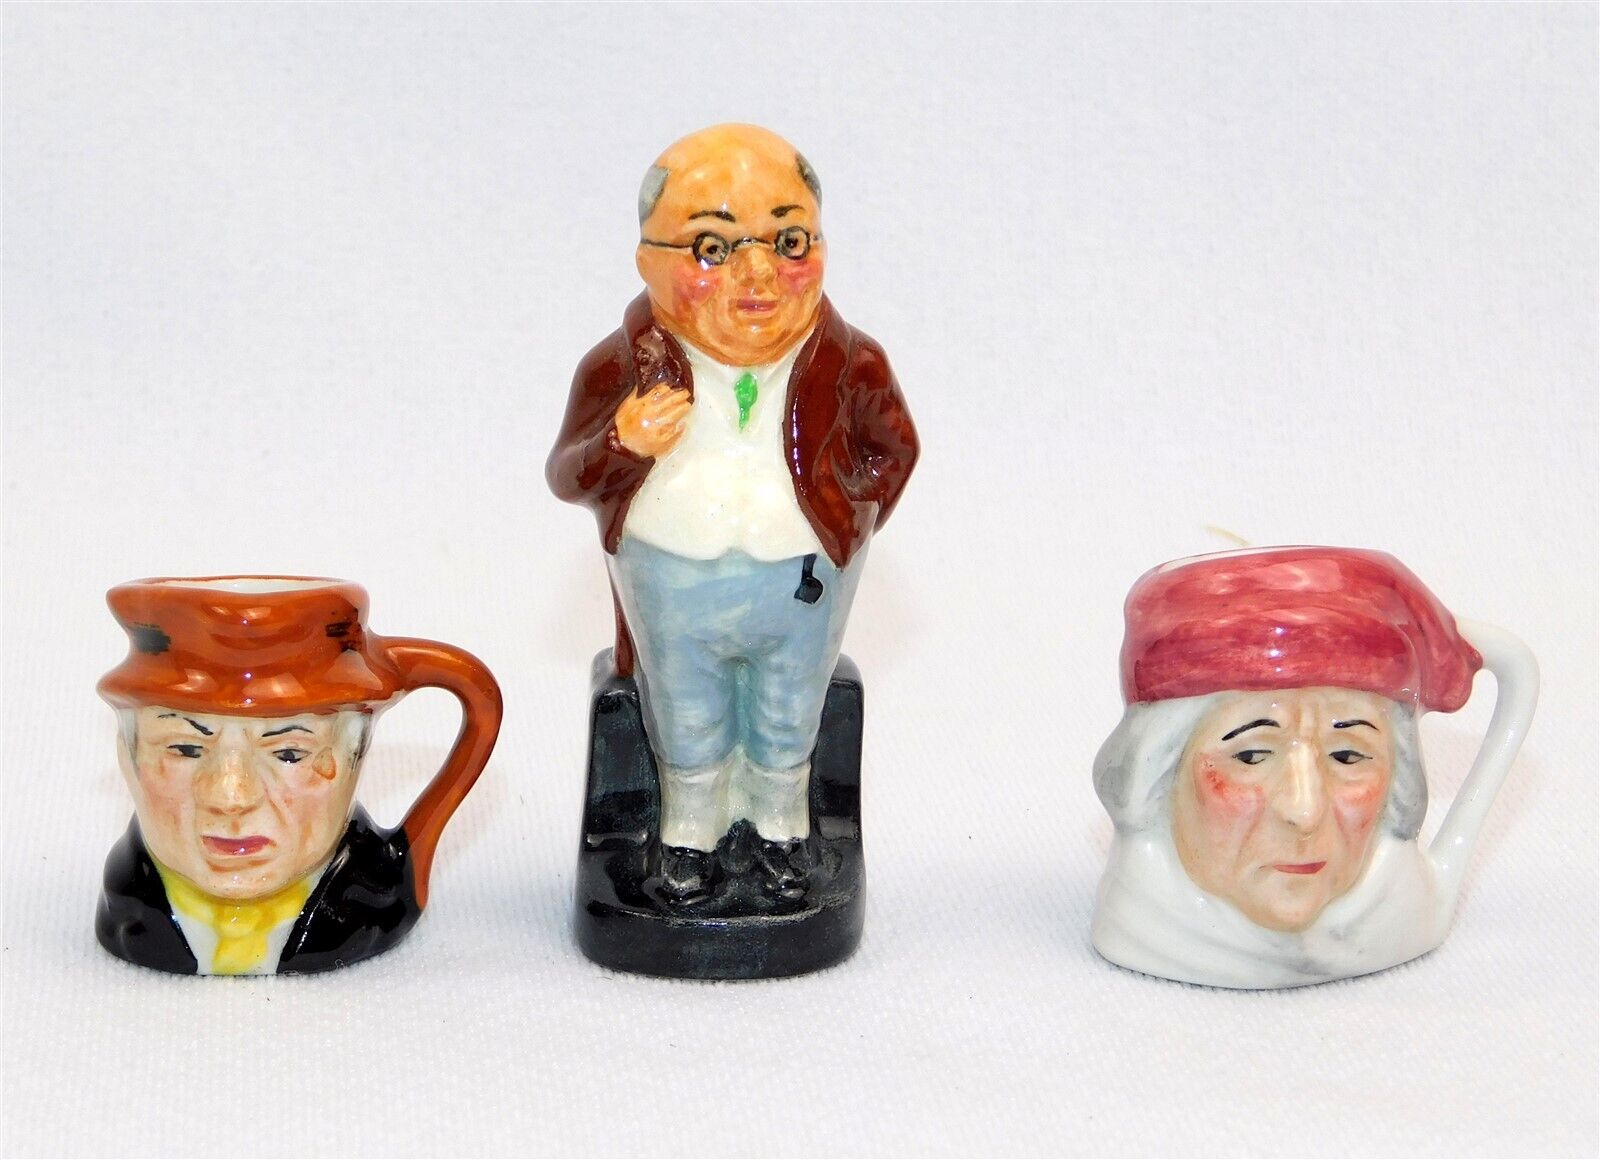 3 Charles Dickens Artone Pickwick Papers Mini Toby Mugs and Figurine